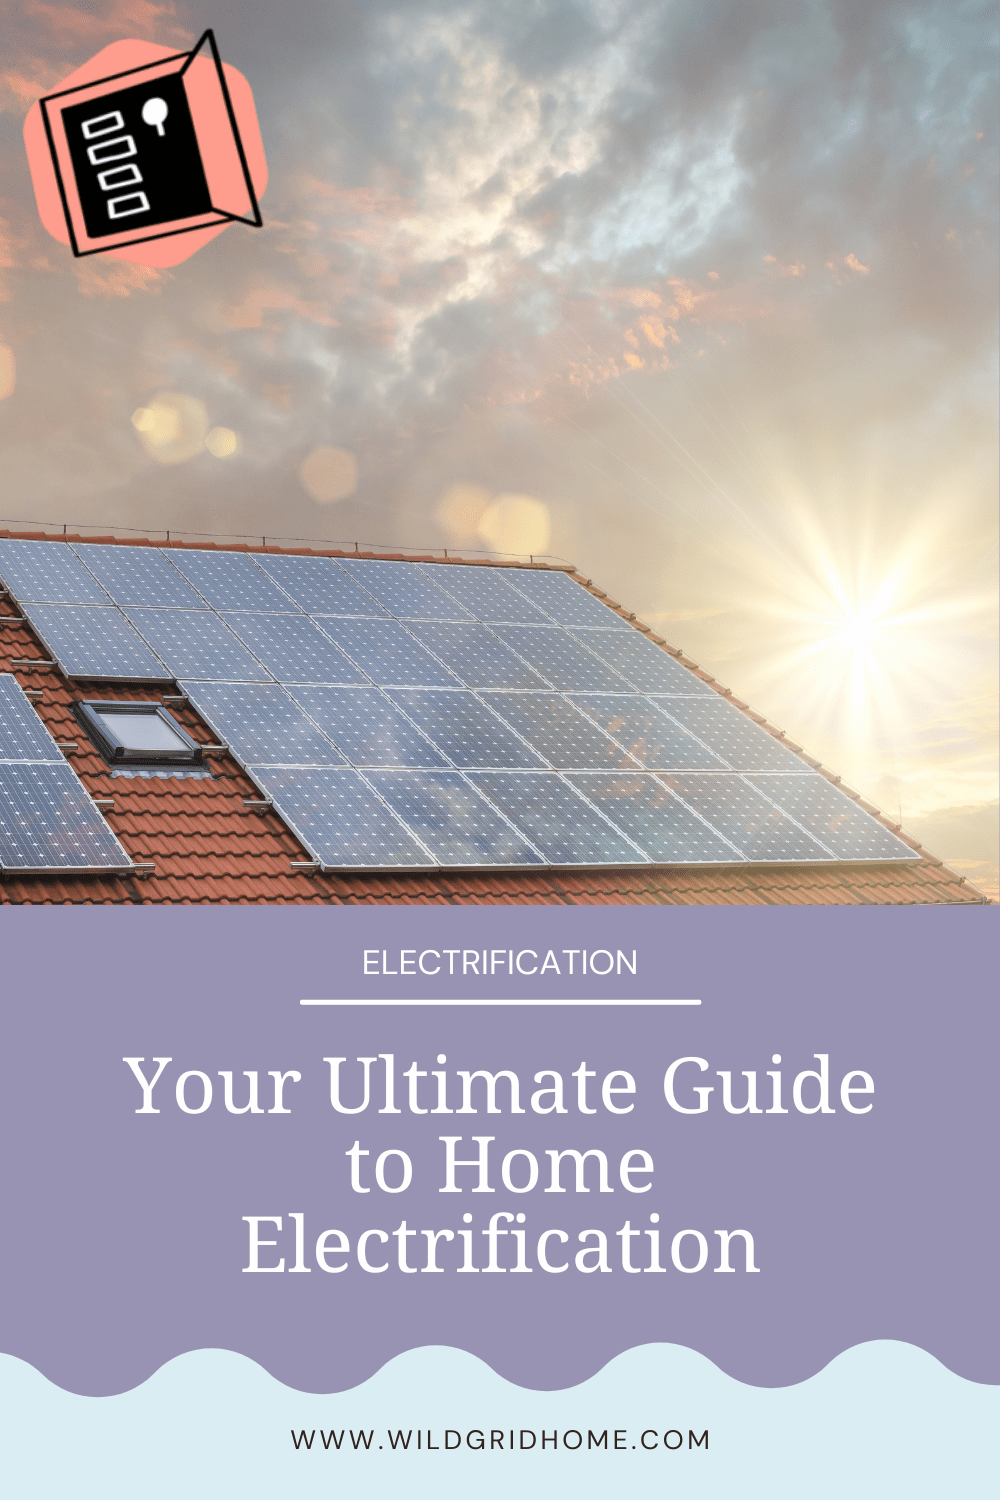 Your Ultimate Guide to Home Electrification - Wildgrid Home